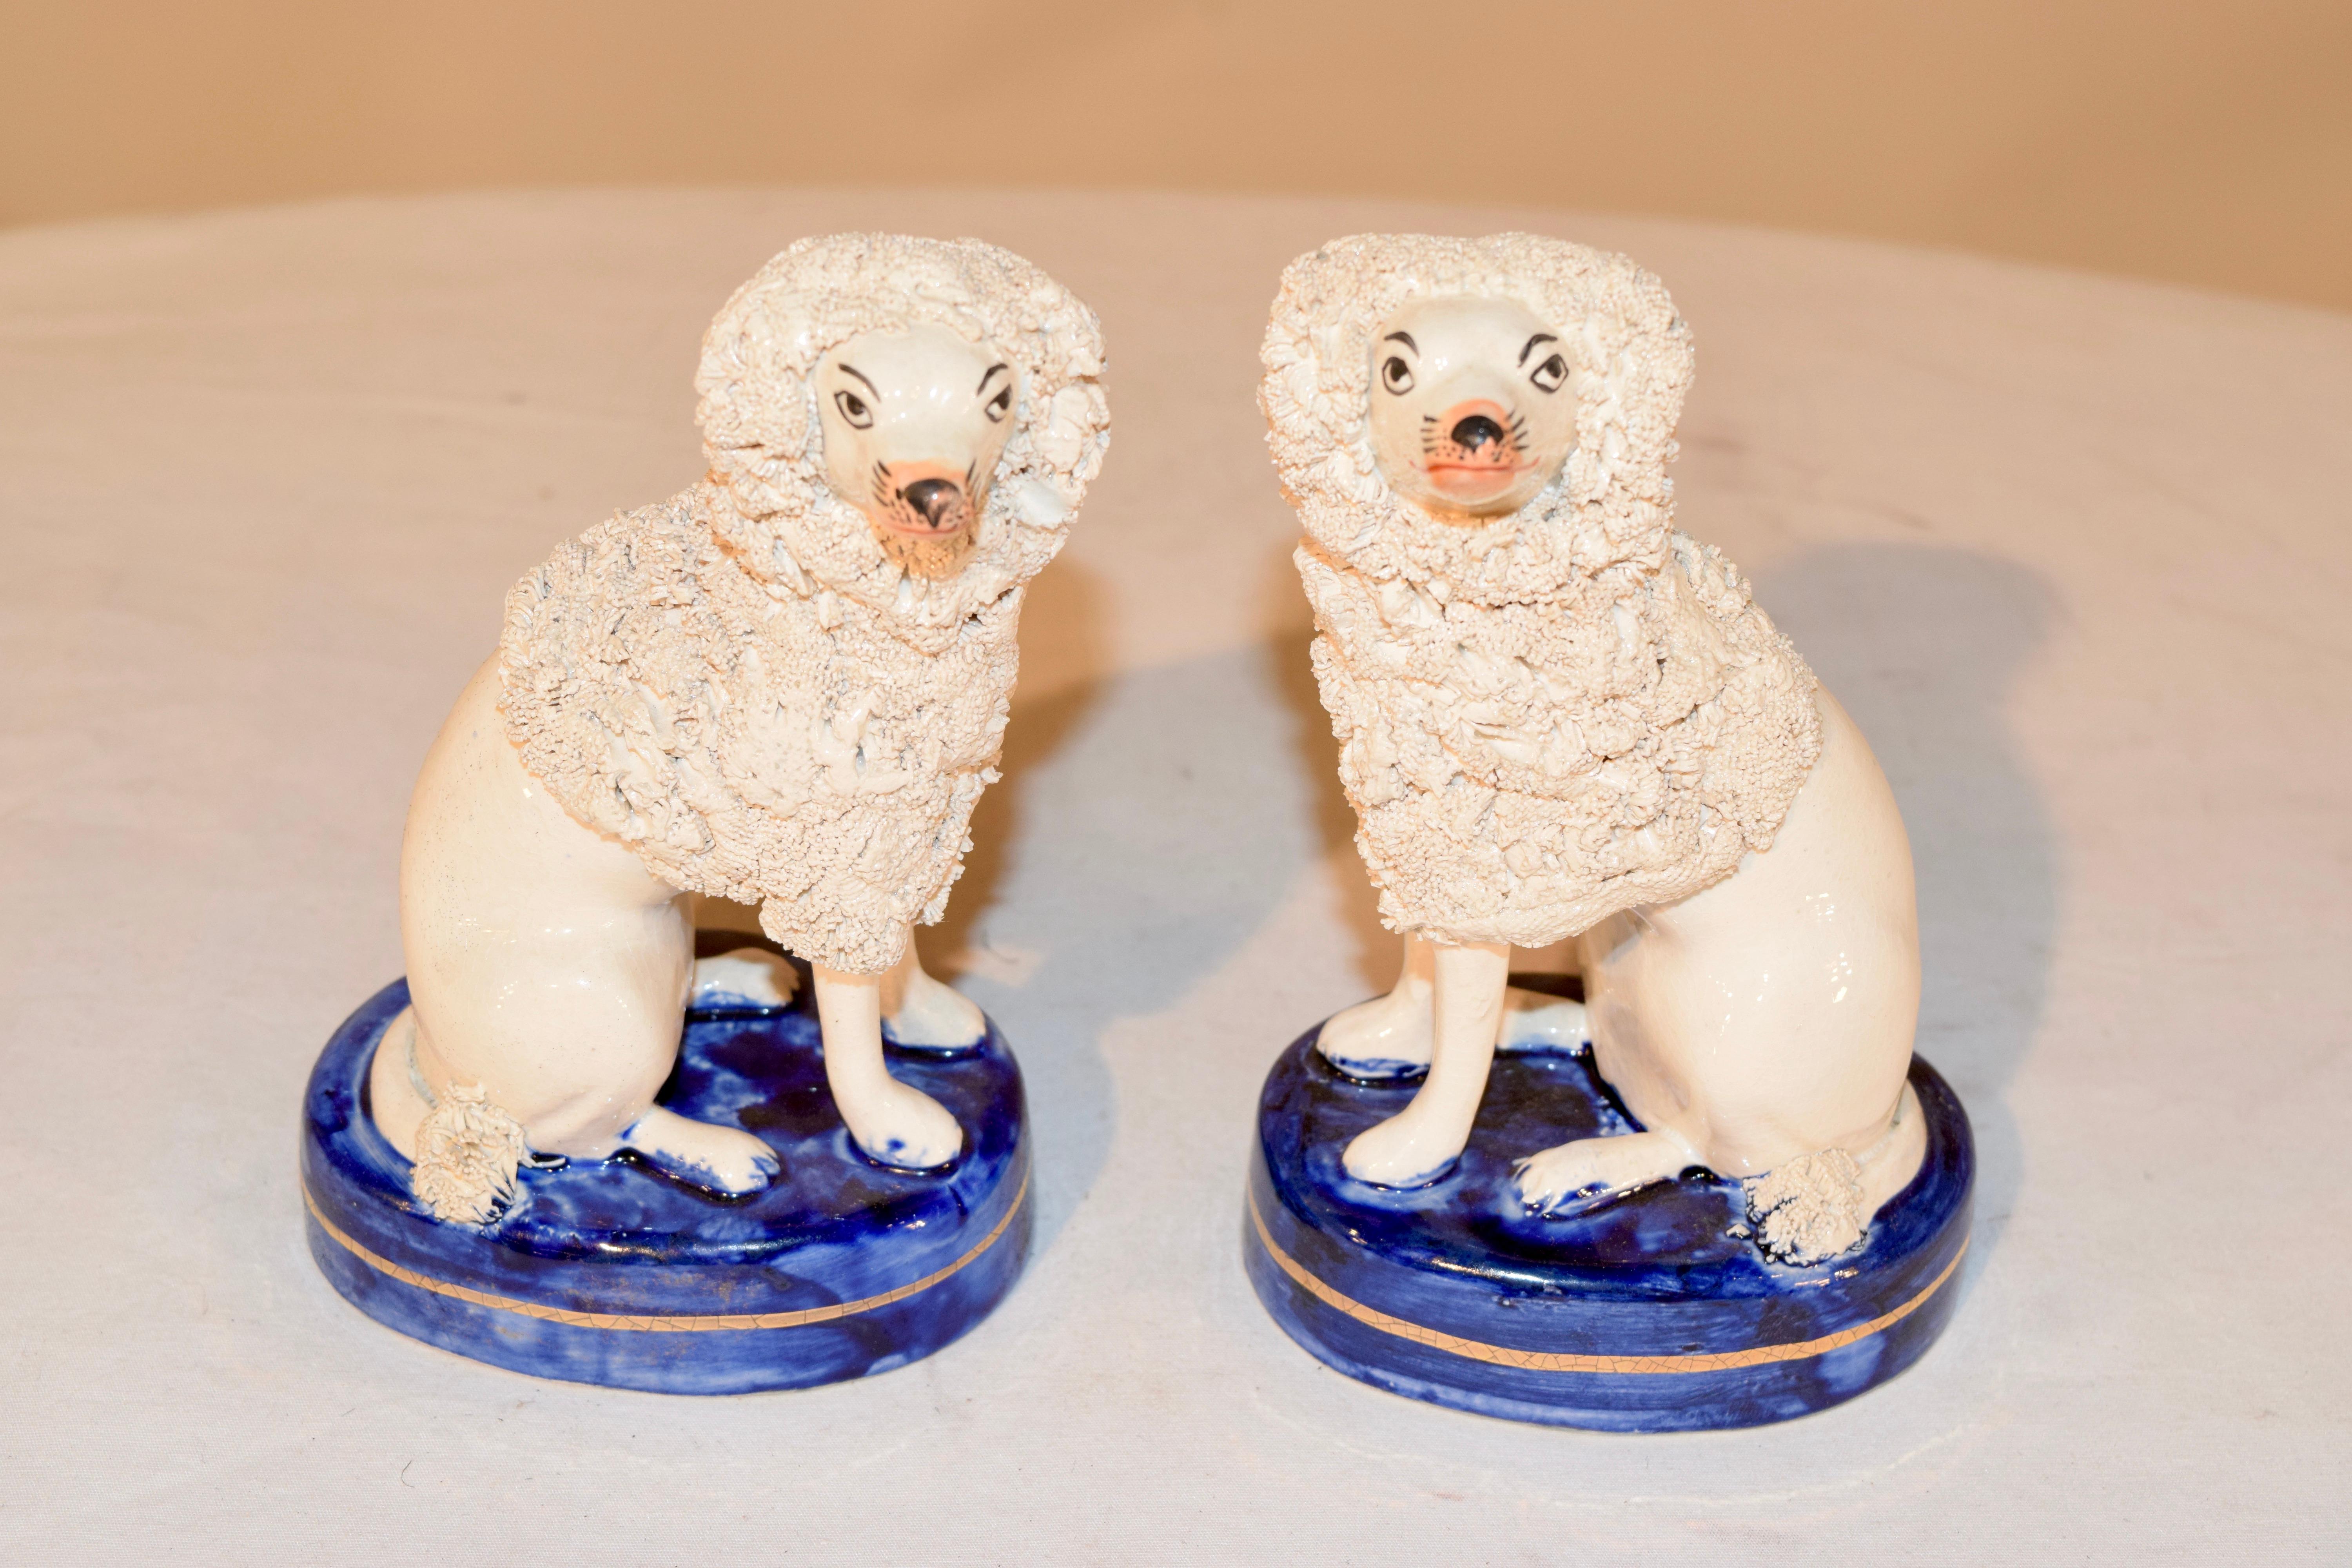 Pair of vintage English poodle figures made in Staffordshire, England in the mid-20th century. Lovely flocking accents and coloring. The poodles are sitting on cobalt blue bases with gilt accents.